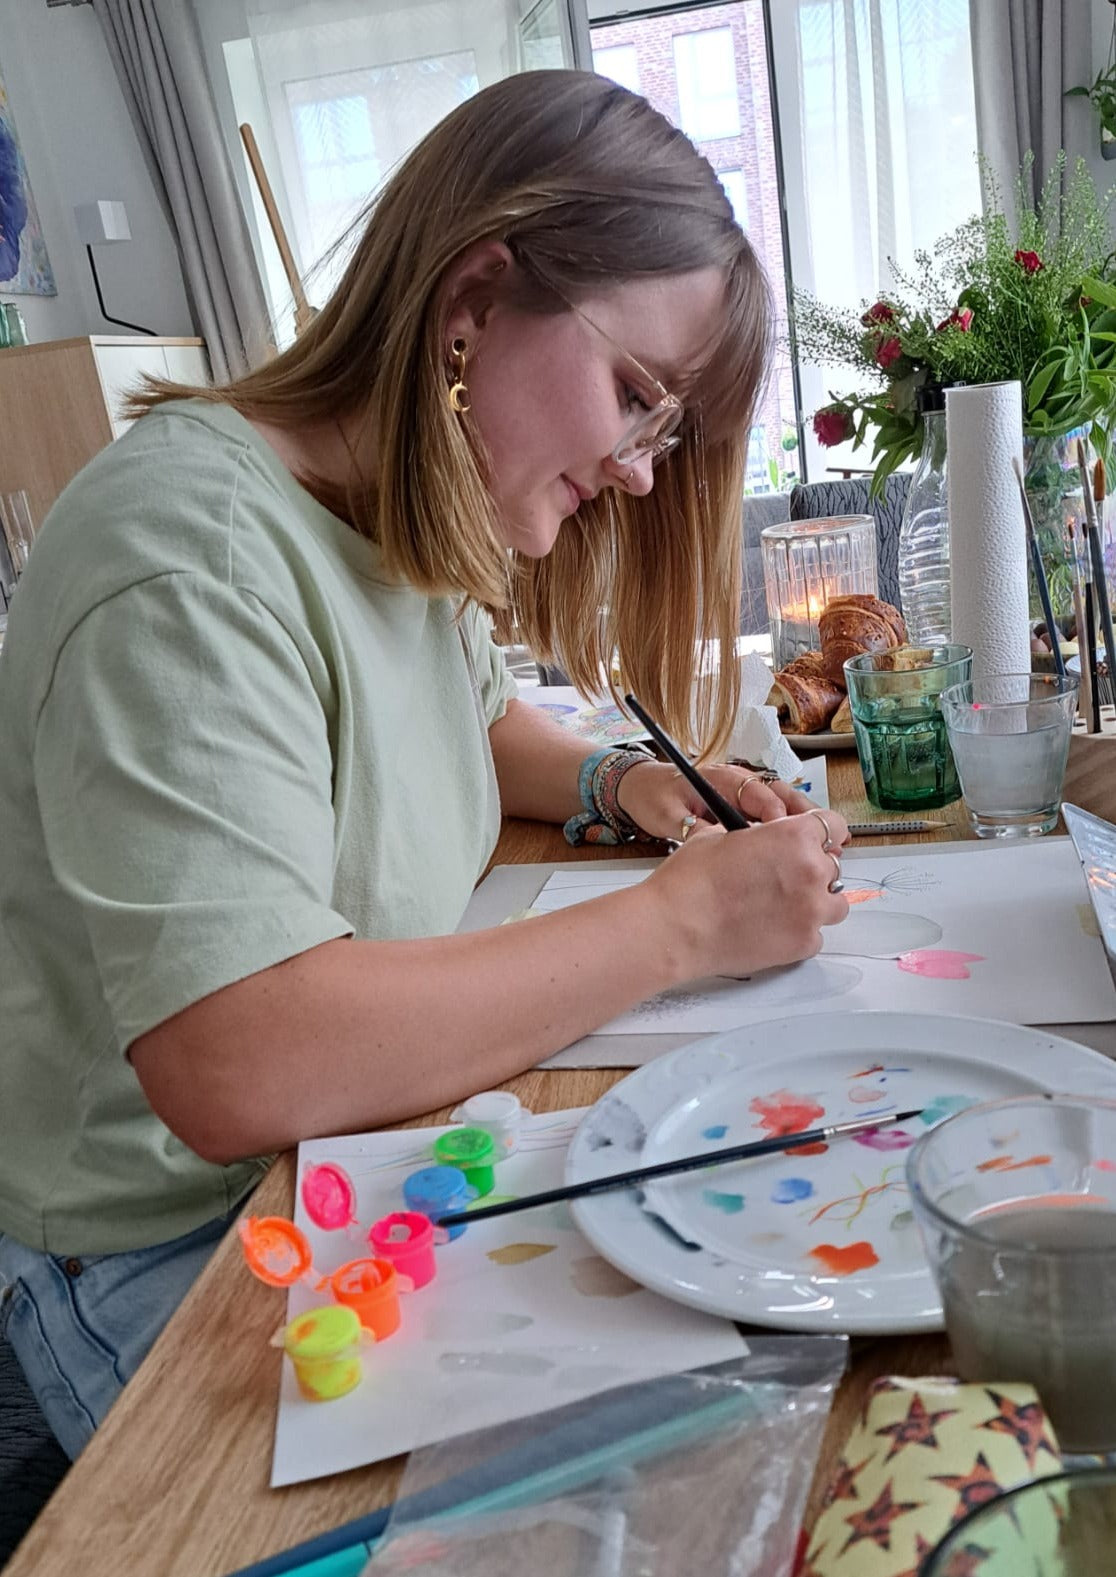 Unique Art & Lively Watercolor Workshop with Slata in Hamburg, Germany by subcultours